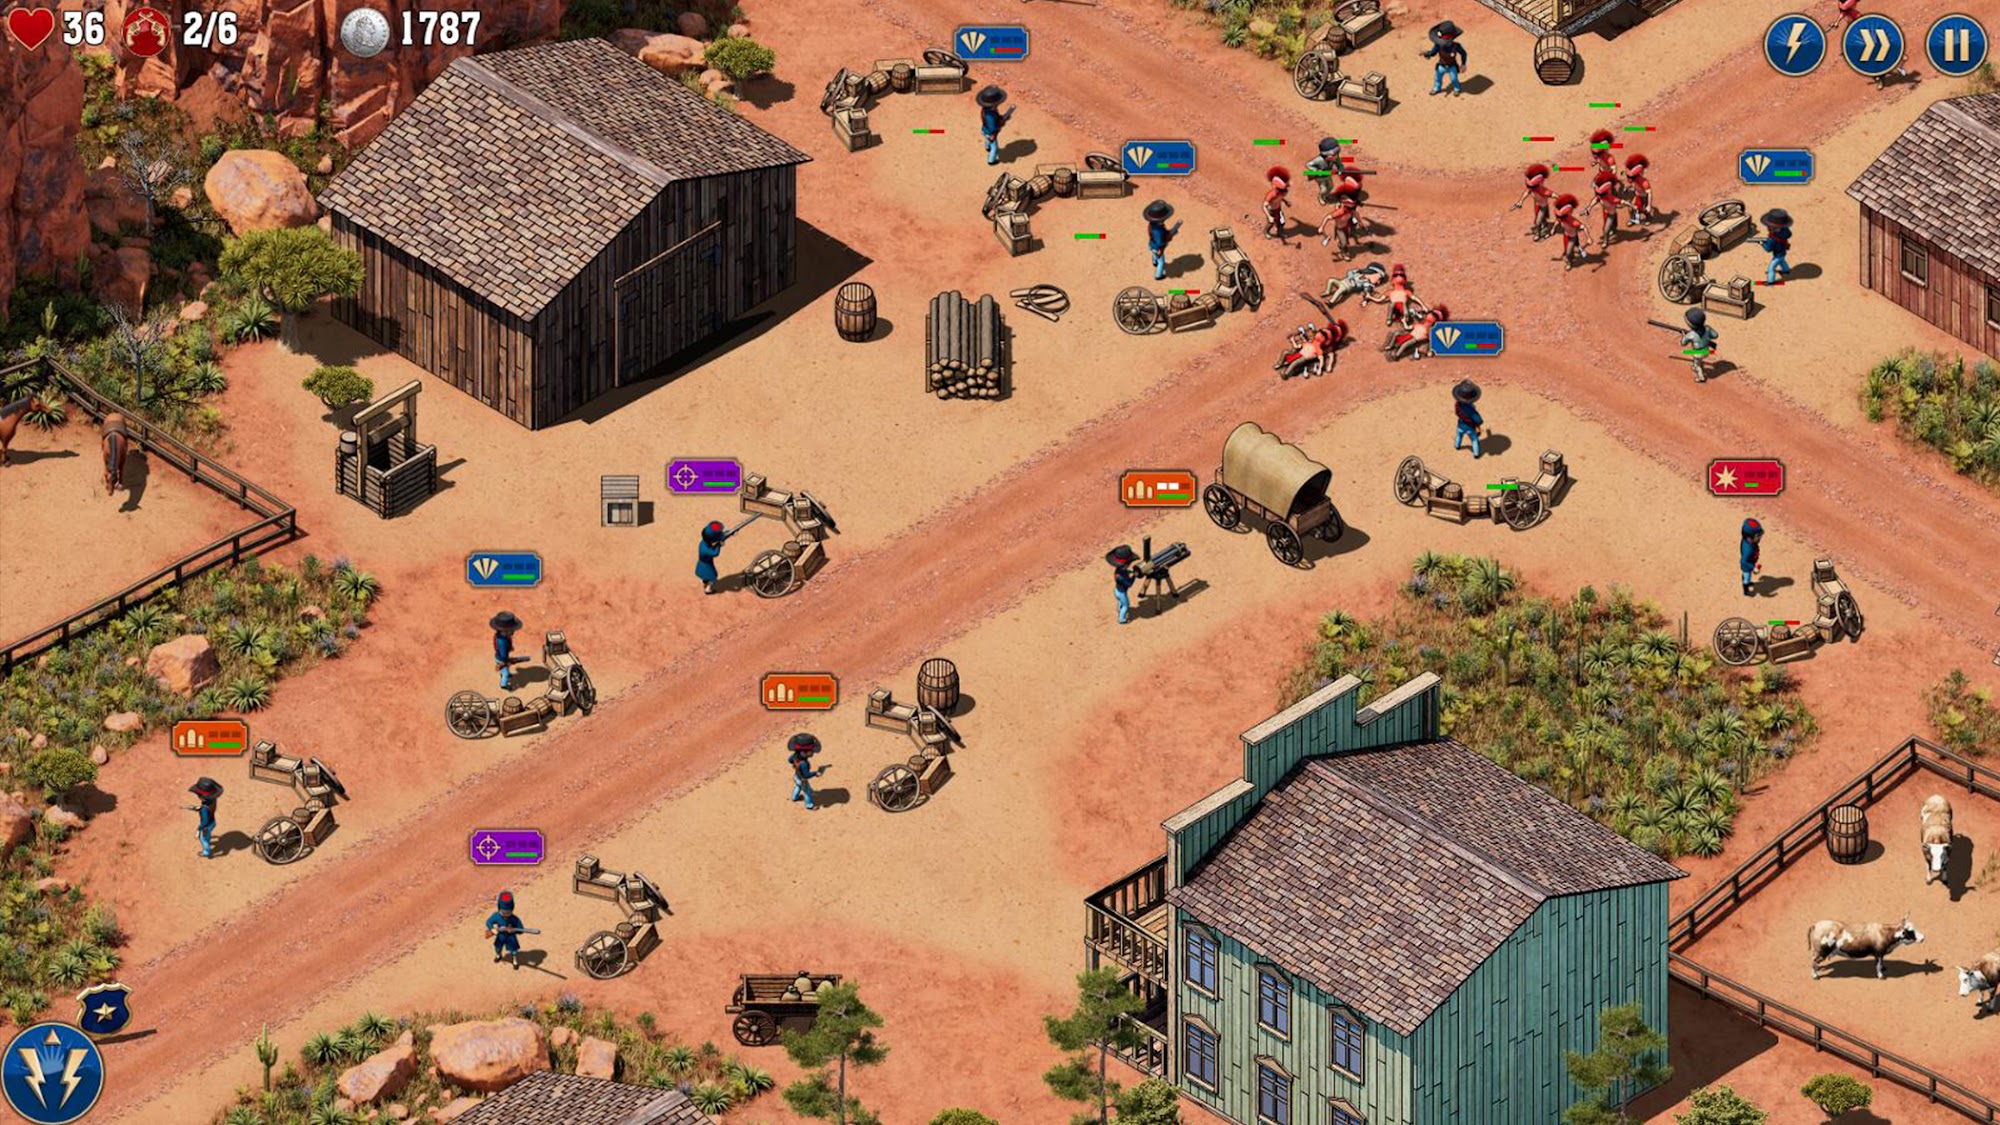 Scarica Lawless West gratis per Android.